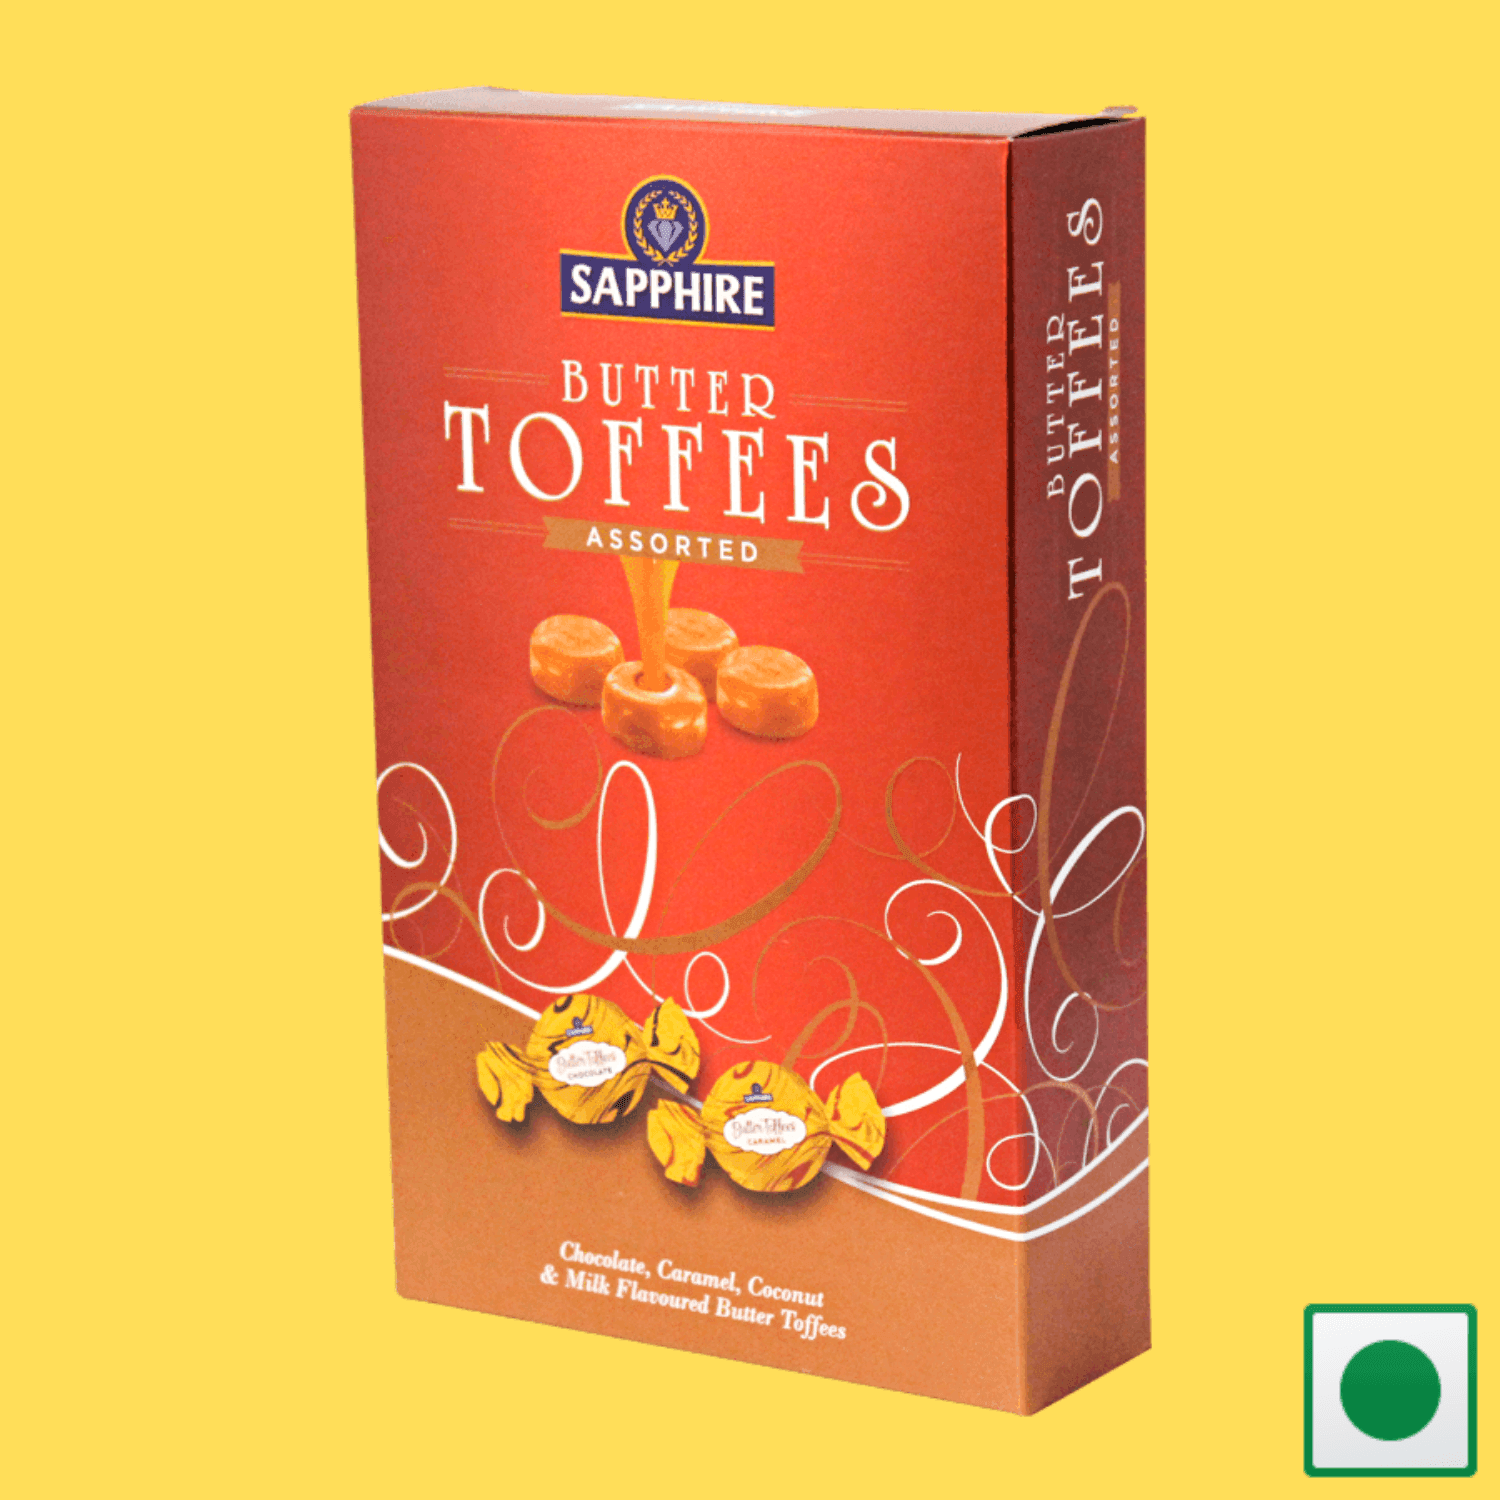 SAPPHIRE BUTTER TOFFEES ASSORTED 225G (Imported) - Super 7 Mart